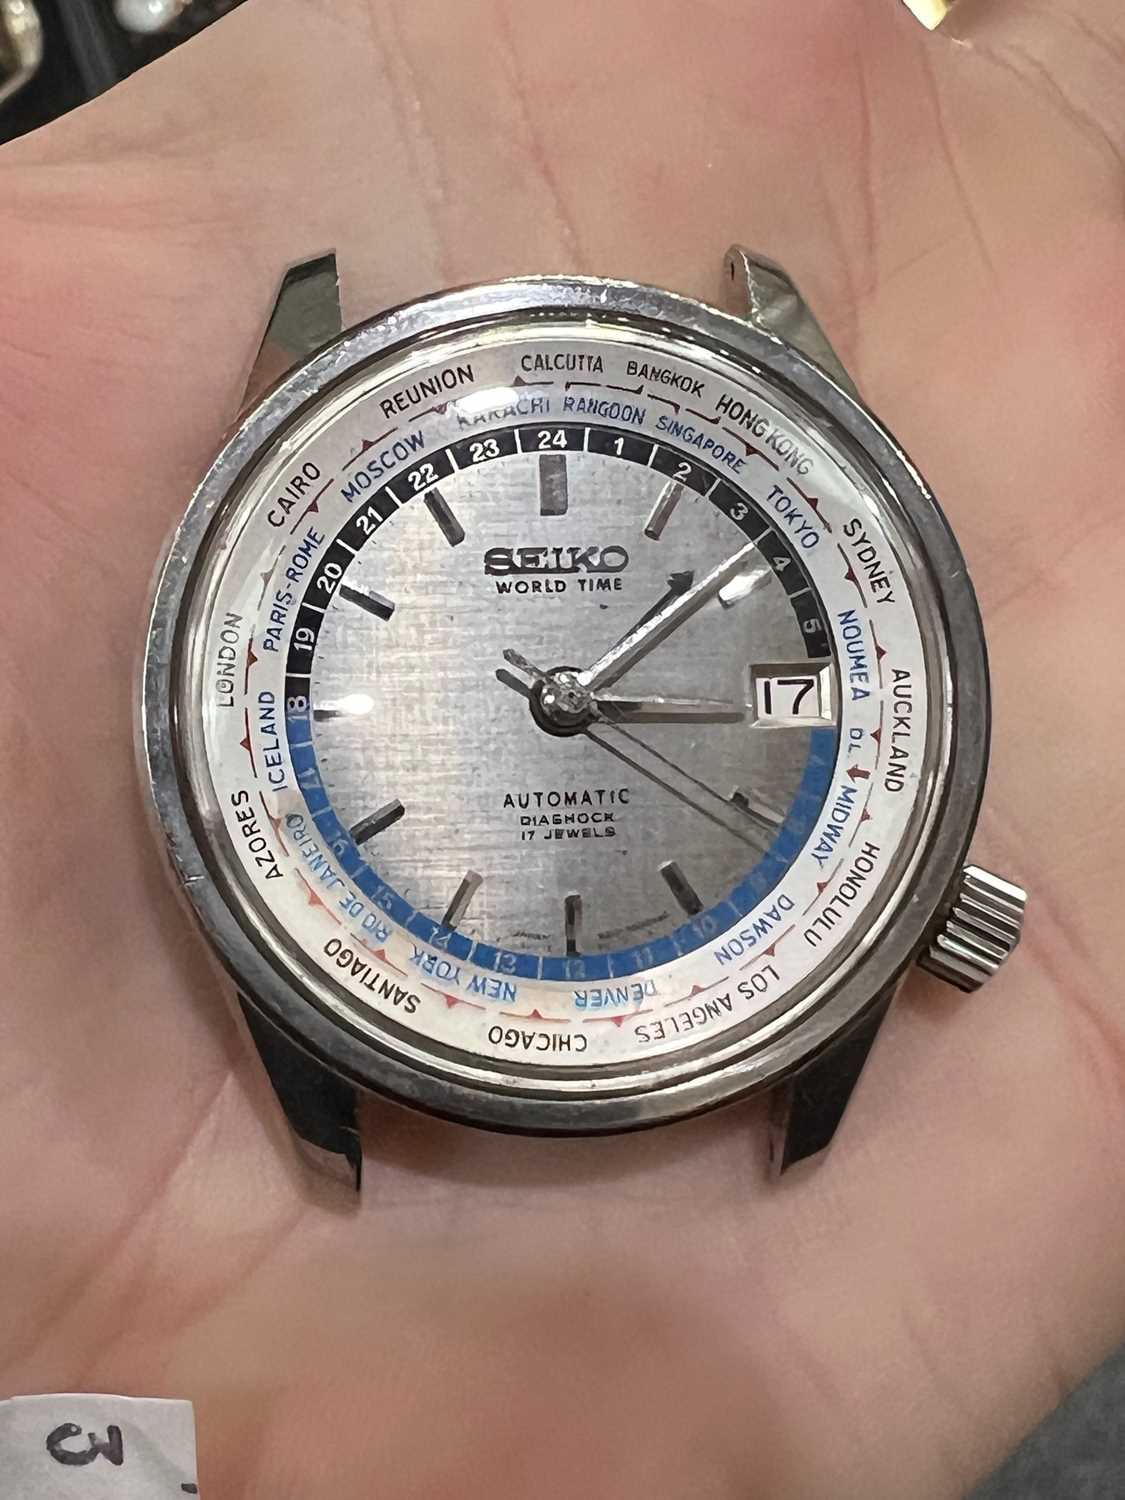 A SEIKO SPECIAL EDITION ASIAN GAMES WORLDTIMER WATCH HEAD - Image 3 of 3